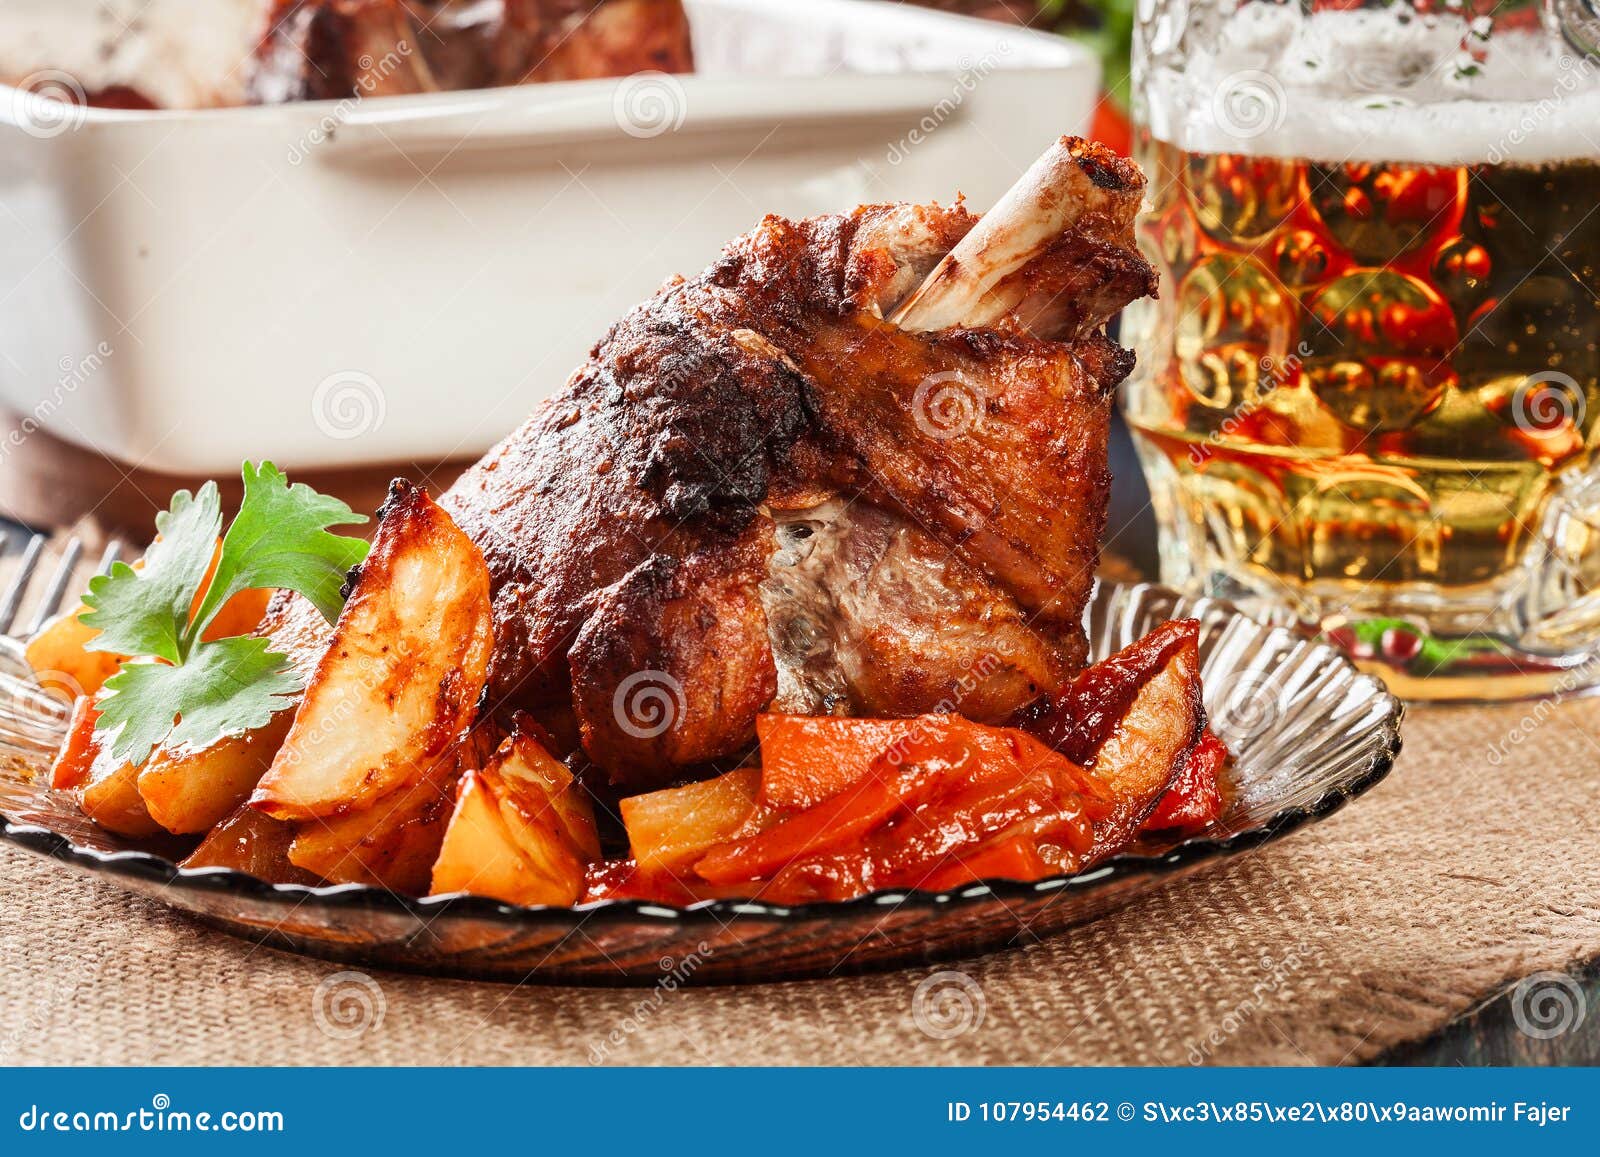 Roasted Turkey Knuckle with Potatoes and Vegetable Stock Photo - Image ...